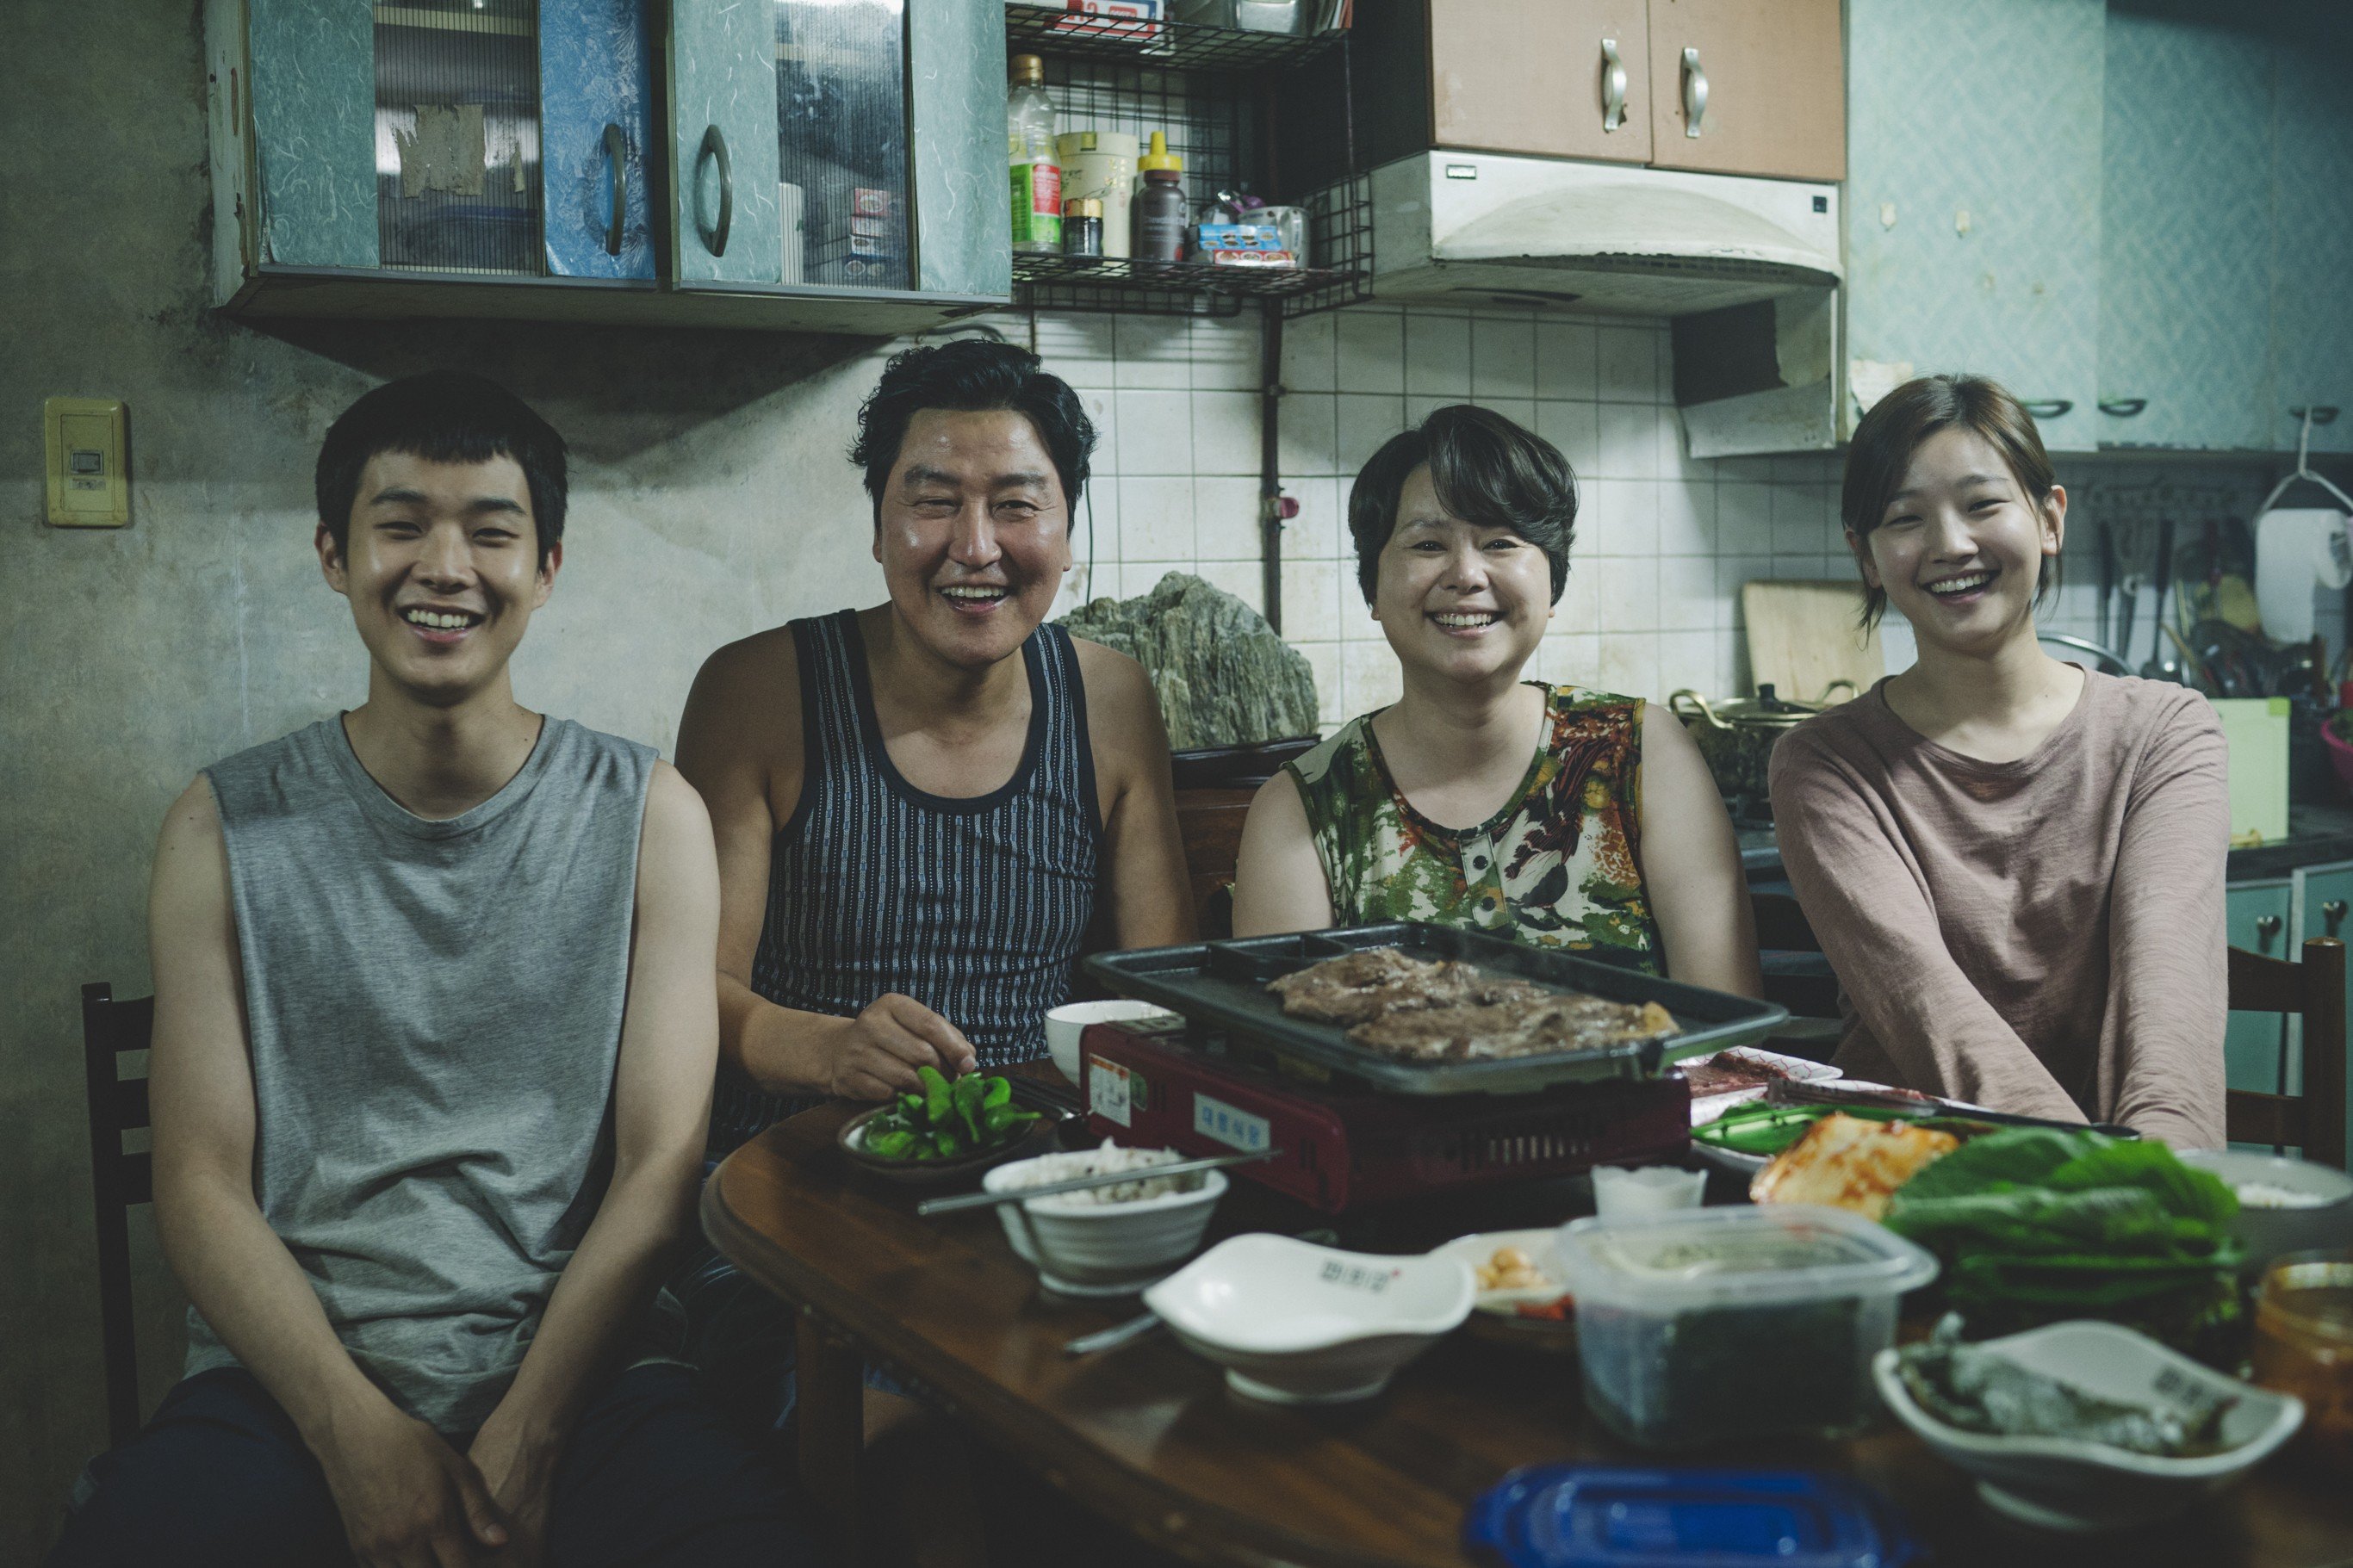 From left: Choi Woo-shik, Song Kang-ho, Chang Hyde-jin and Park So-dam in a still from Parasite. Photo: CJ Entertainment